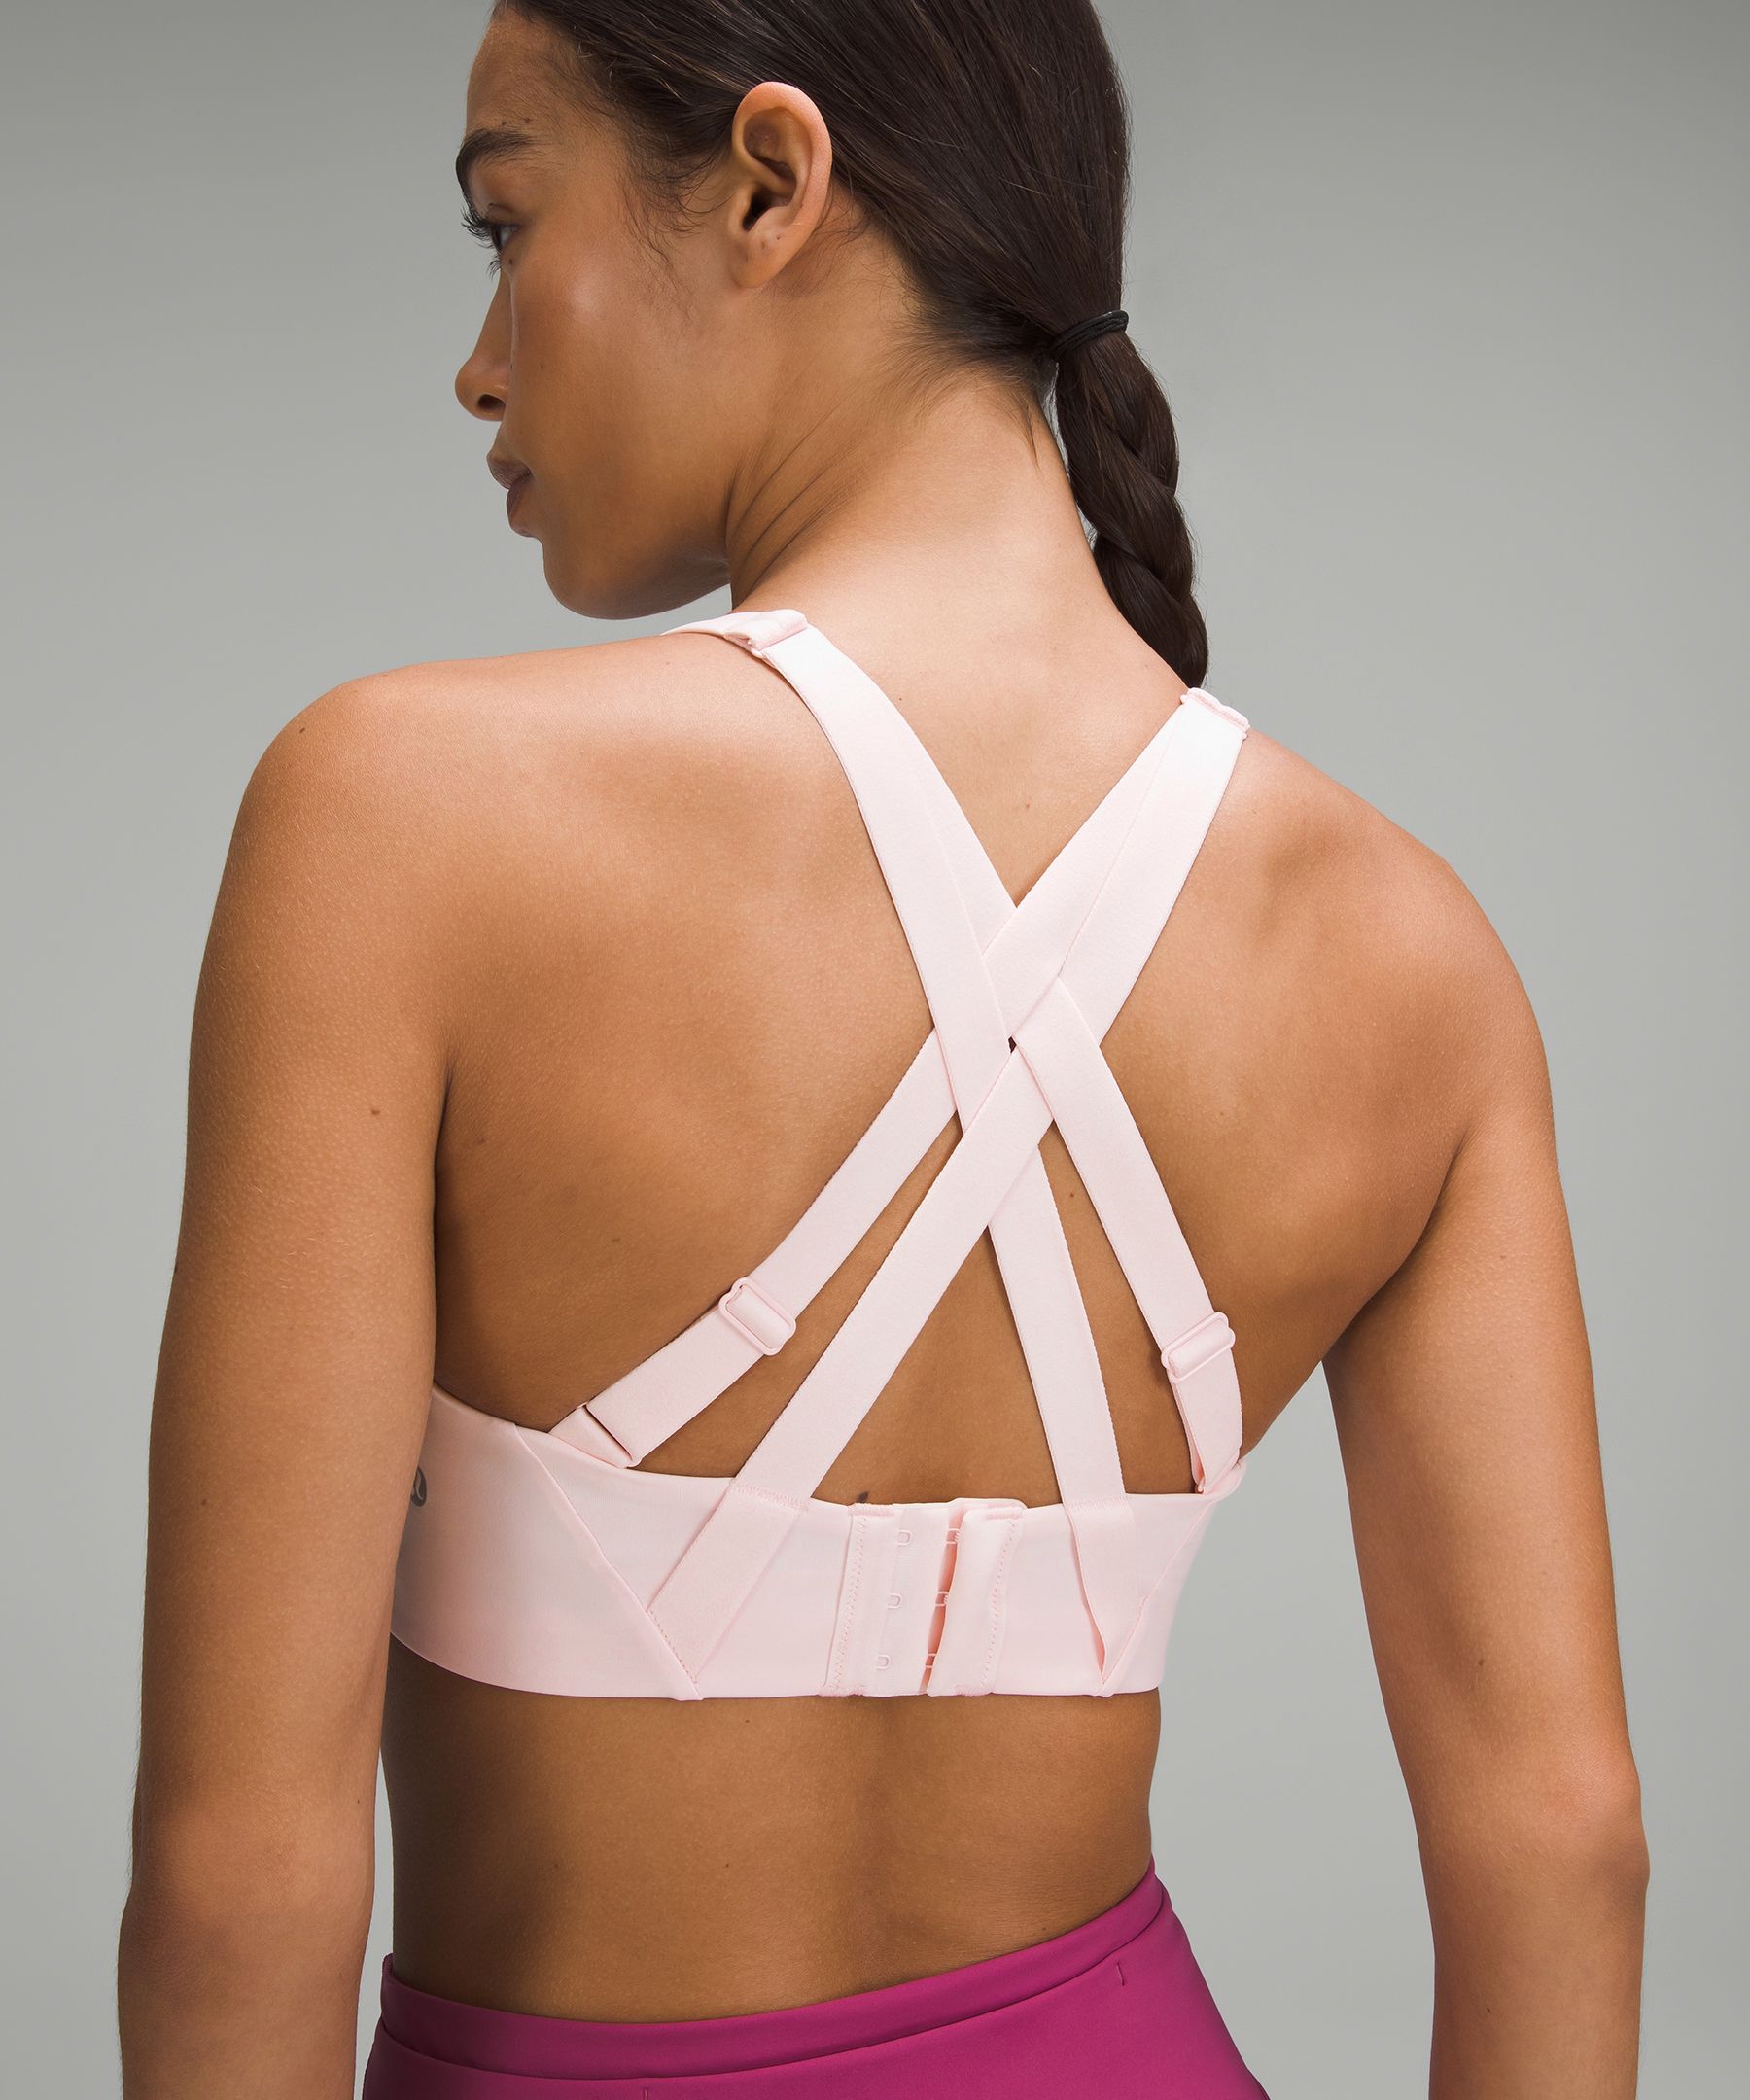 Lululemon shoppers are calling this the 'glass slipper of sports bras